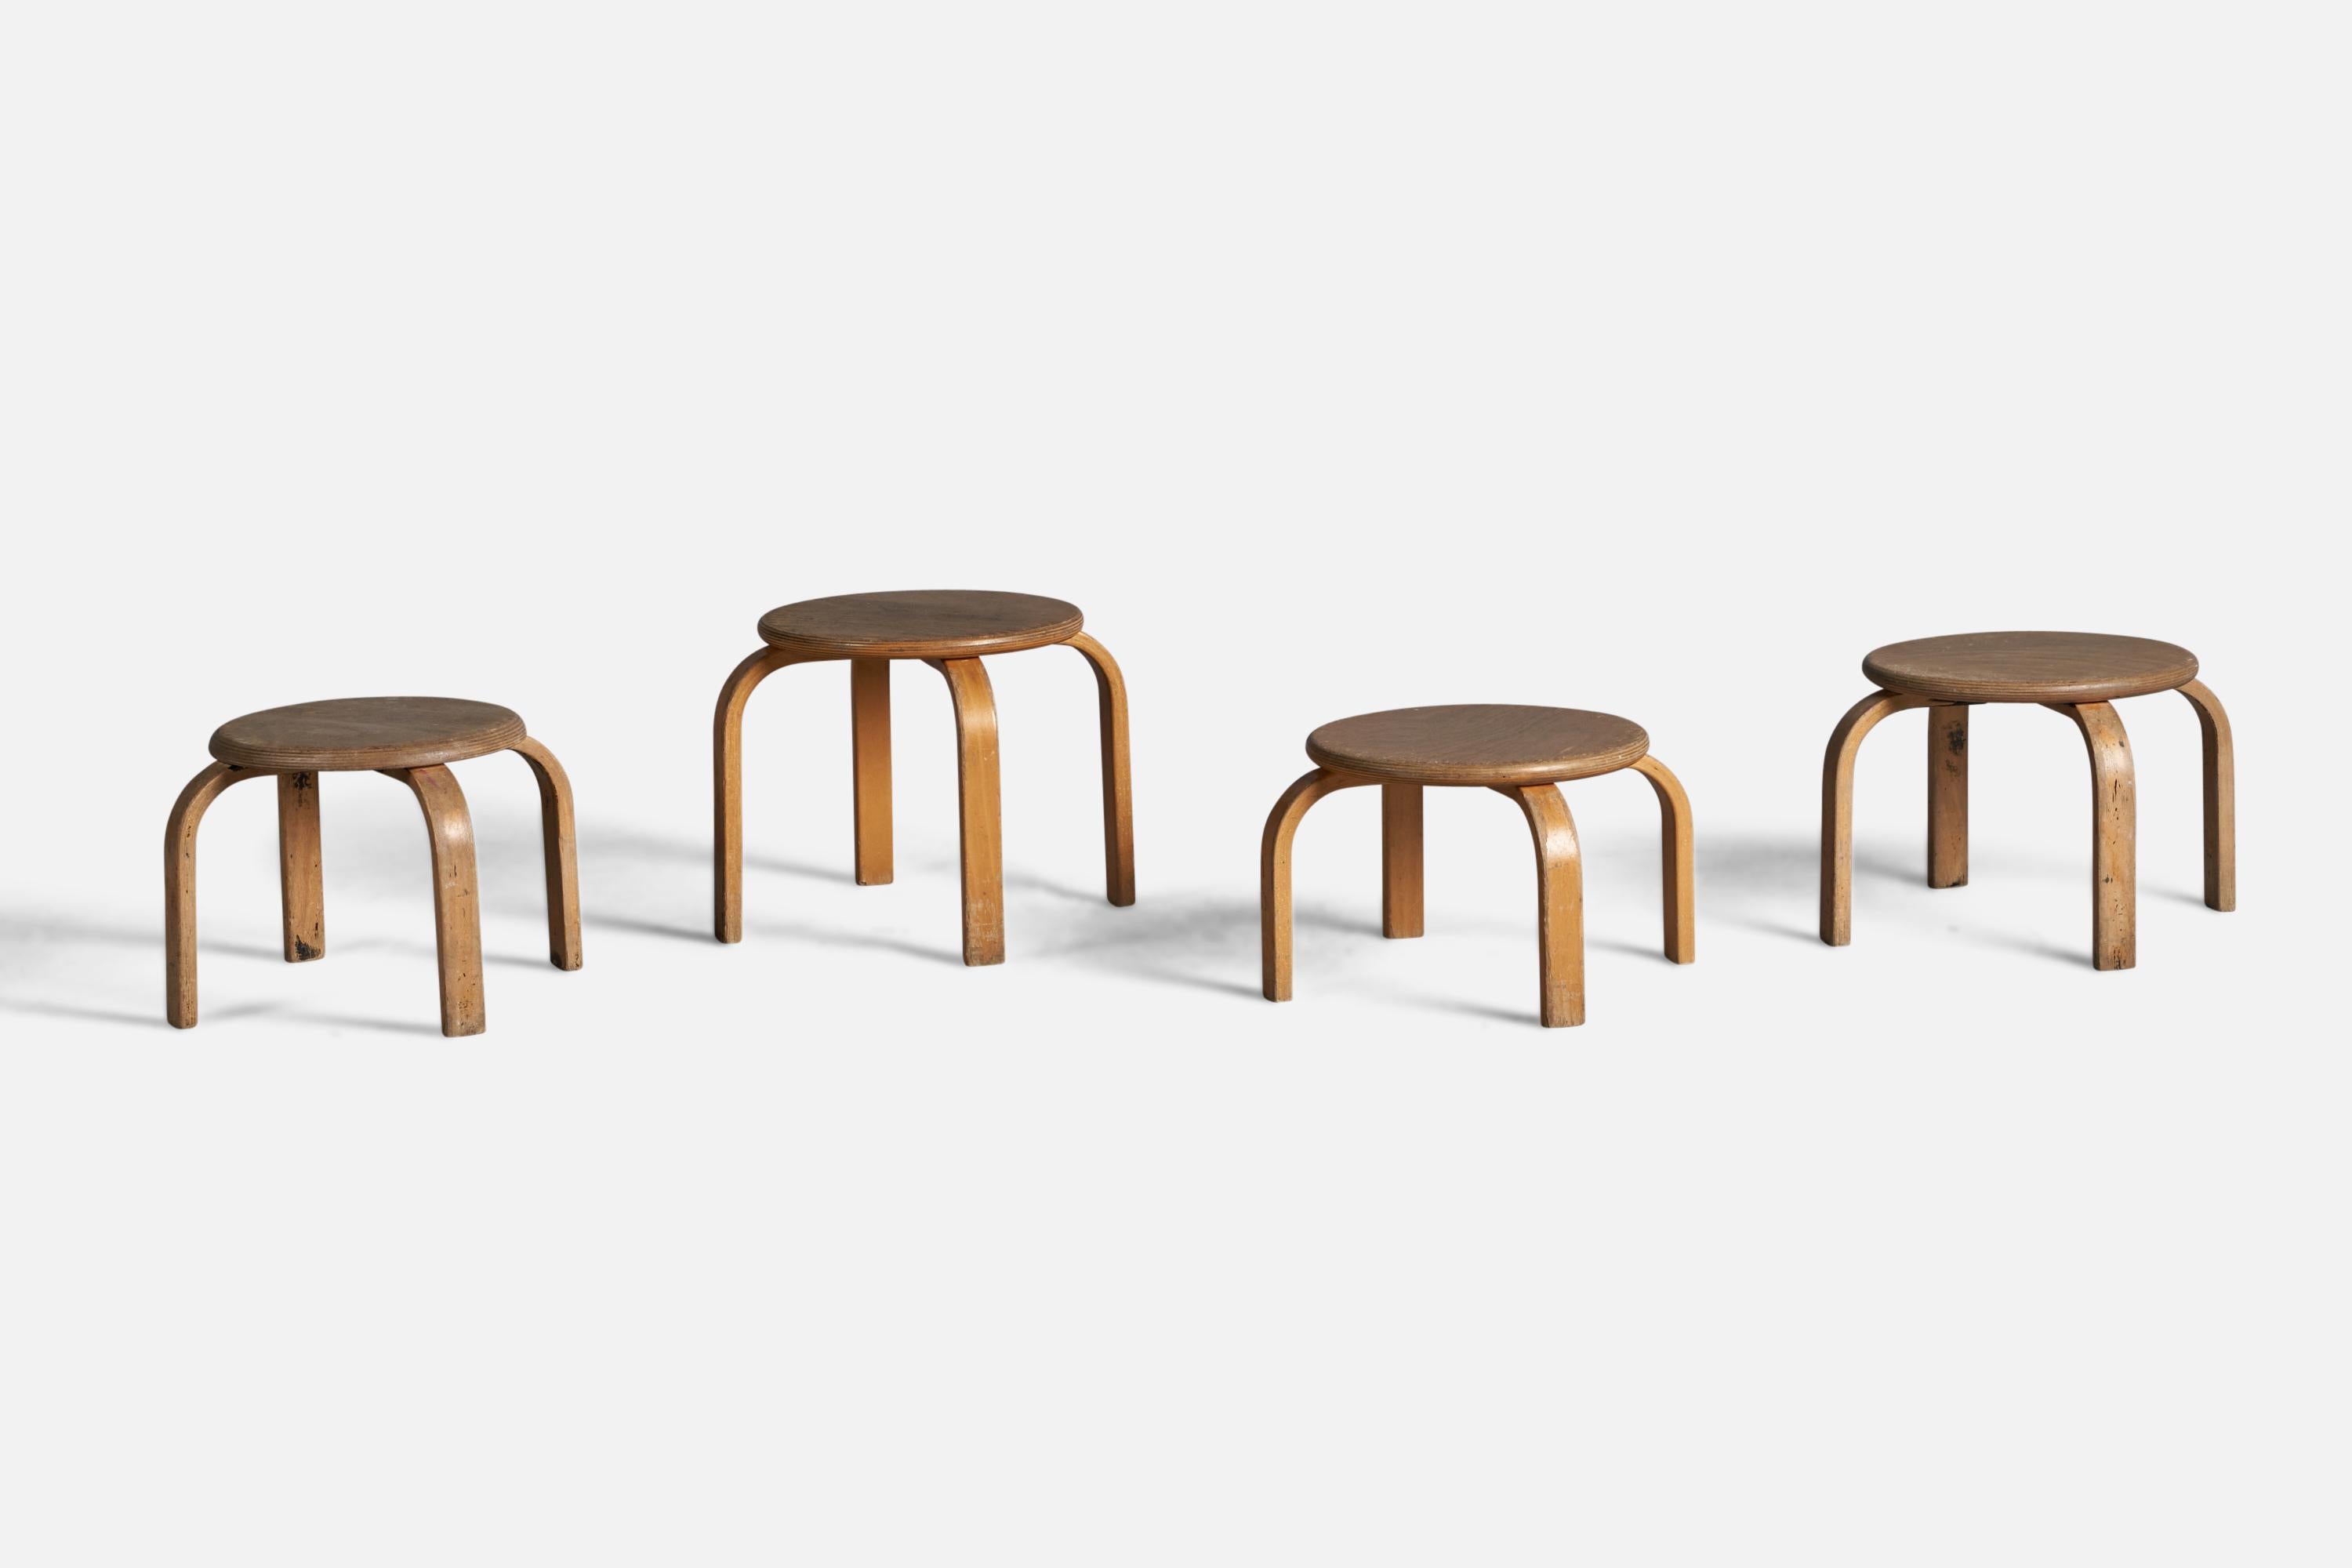 A set of 4 oak and bentwood stools, designed and produced in Denmark, 1940s.

Dimensions of Each Stool:
17.15